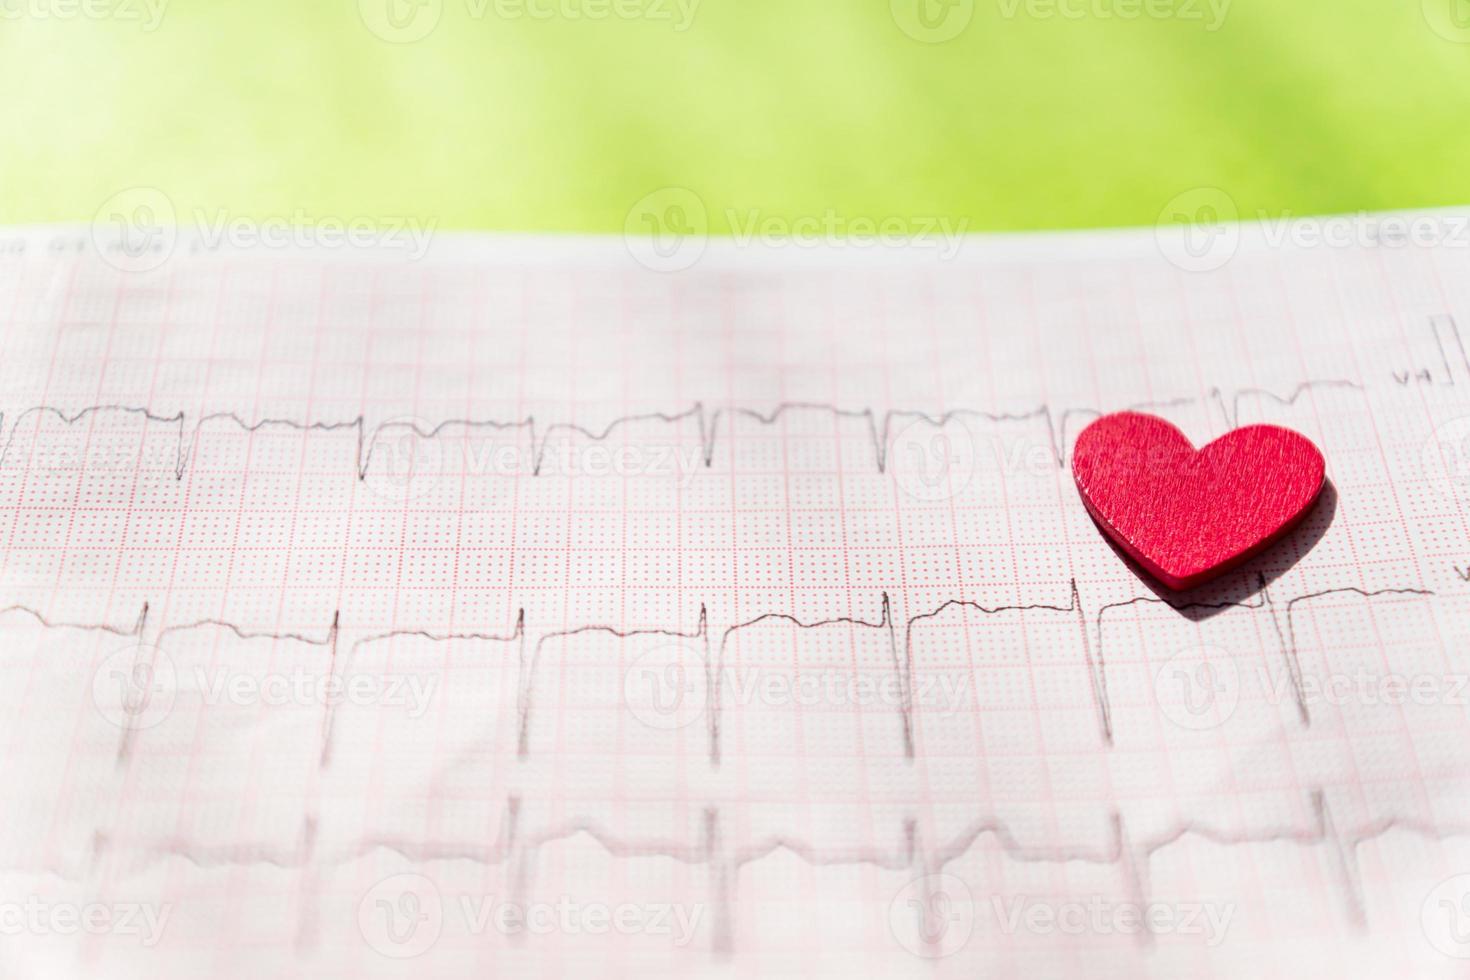 close up of an electrocardiogram in paper form vith red wooden heart. ECG or EKG paper  background texture.  medical and healthcare concept. photo